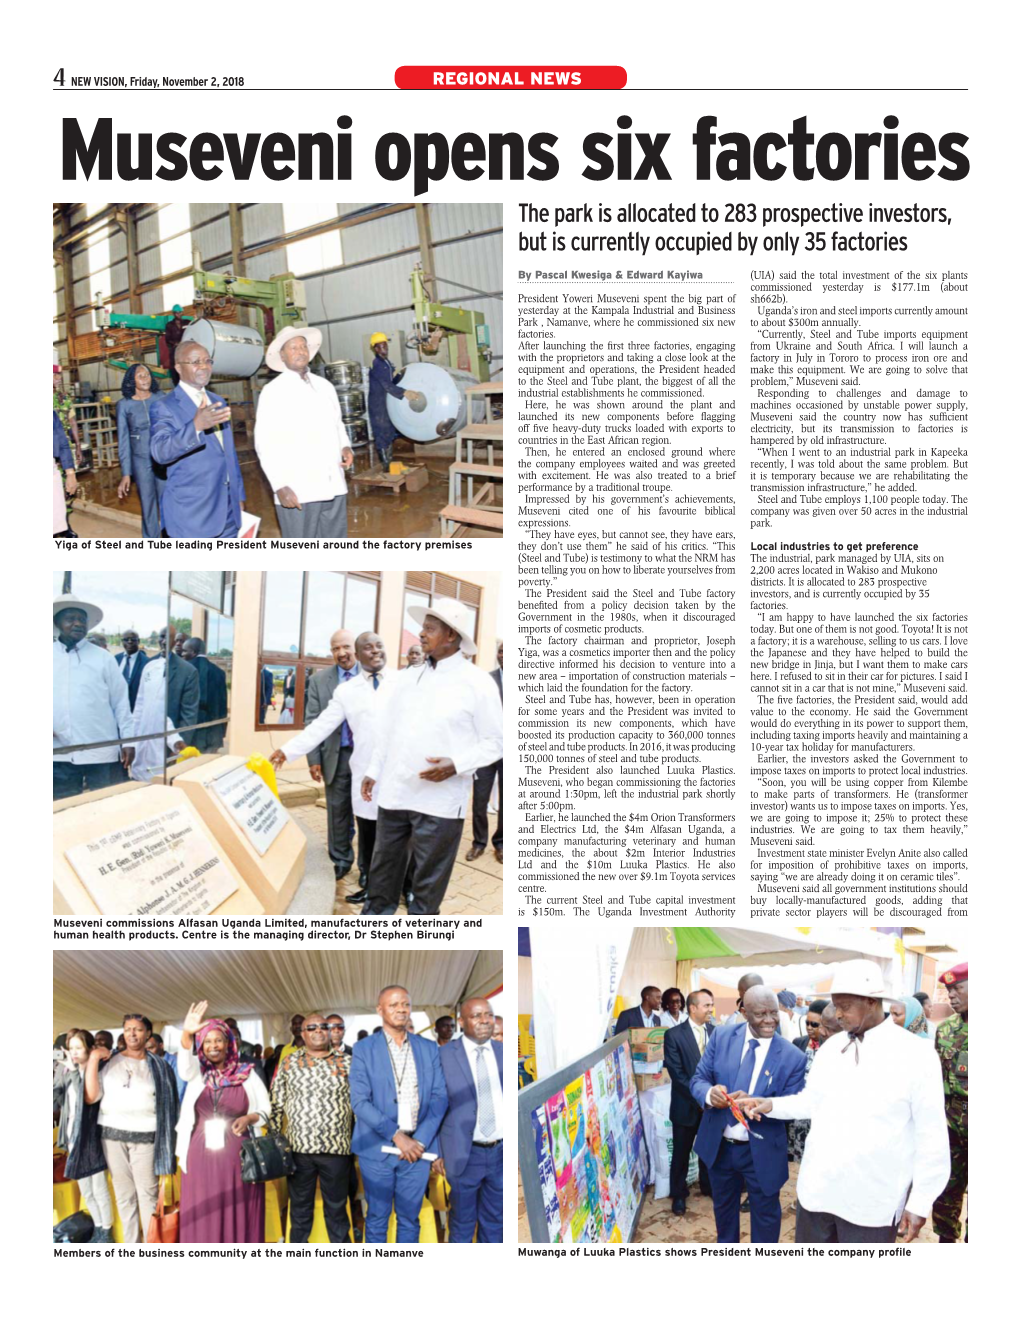 Museveni Opens Six Factories the Park Is Allocated to 283 Prospective Investors, but Is Currently Occupied by Only 35 Factories